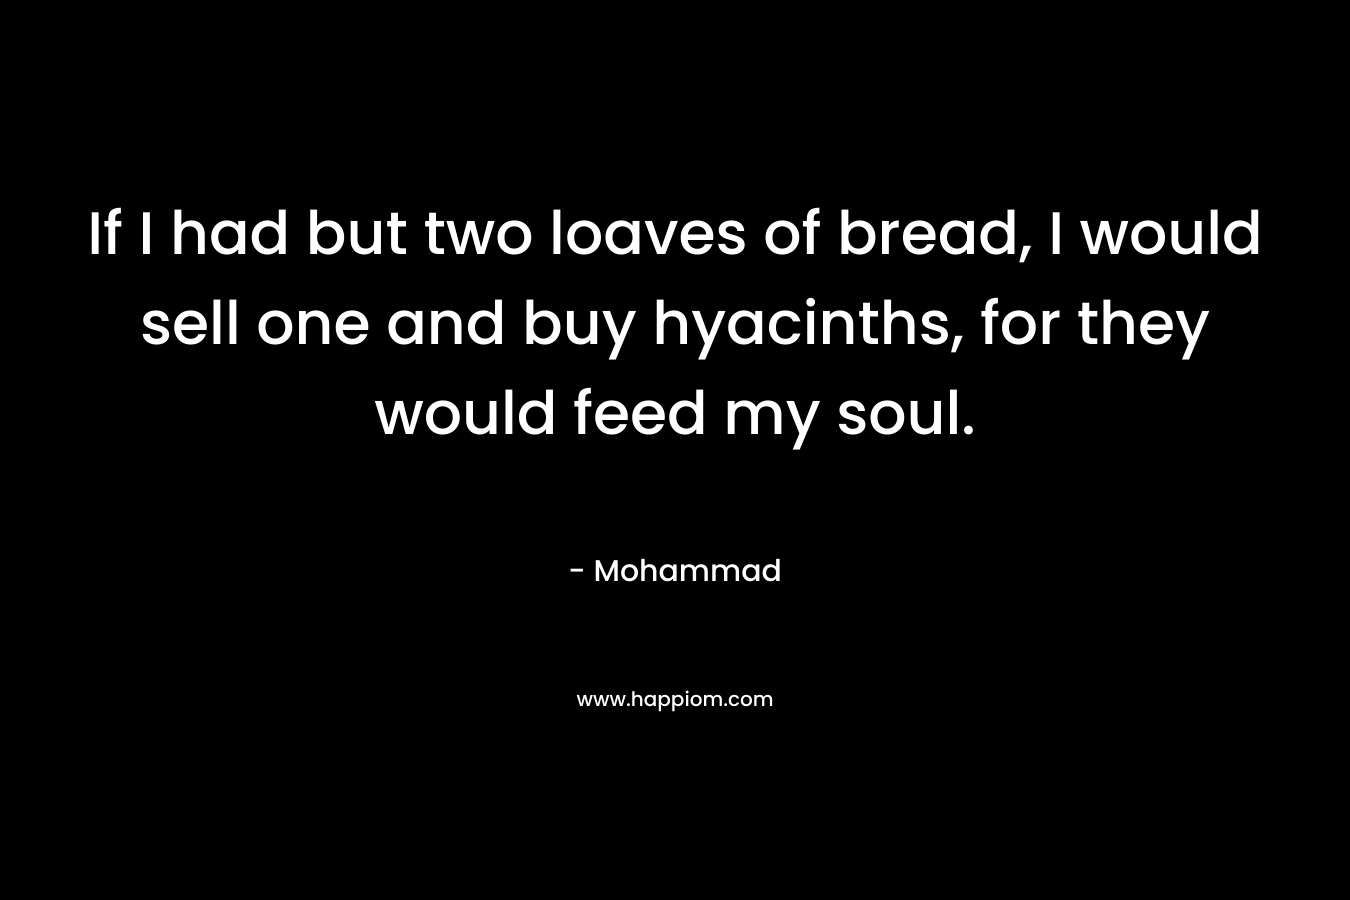 If I had but two loaves of bread, I would sell one and buy hyacinths, for they would feed my soul. – Mohammad